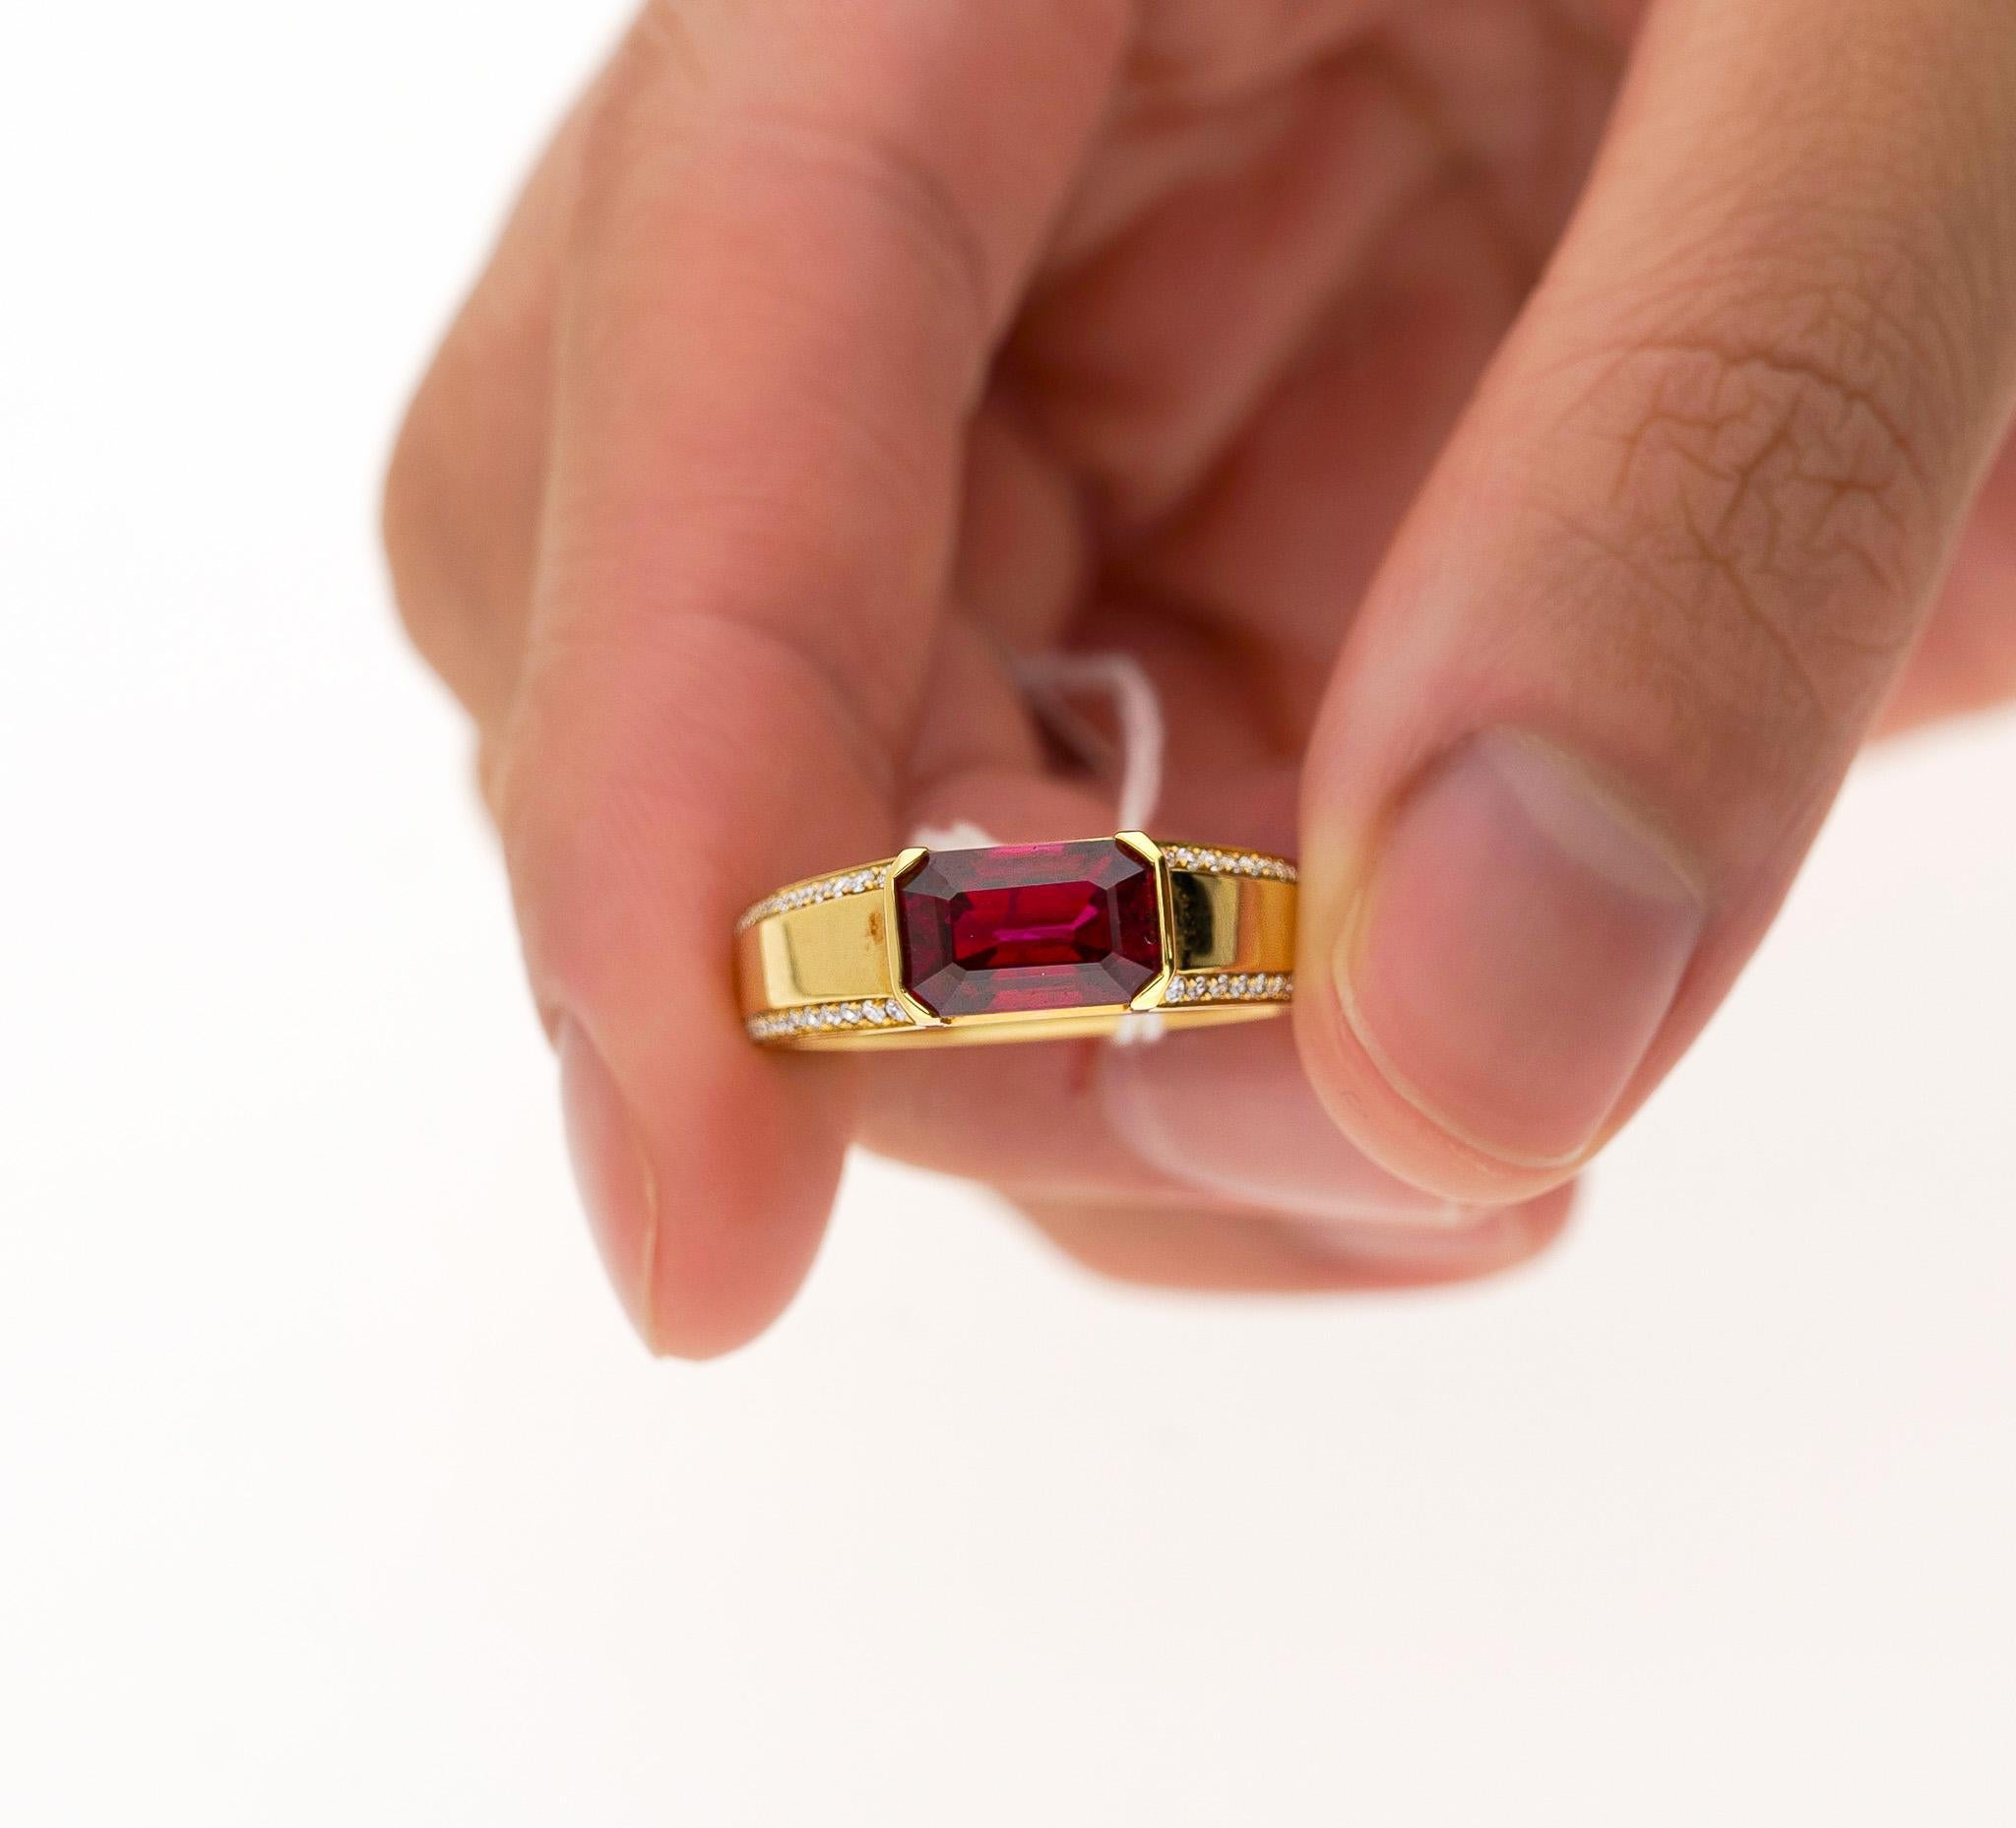 2.09 Carat Vivid Red Pigeon's Blood Burma Ruby Emerald Cut East-West Ring For Sale 5